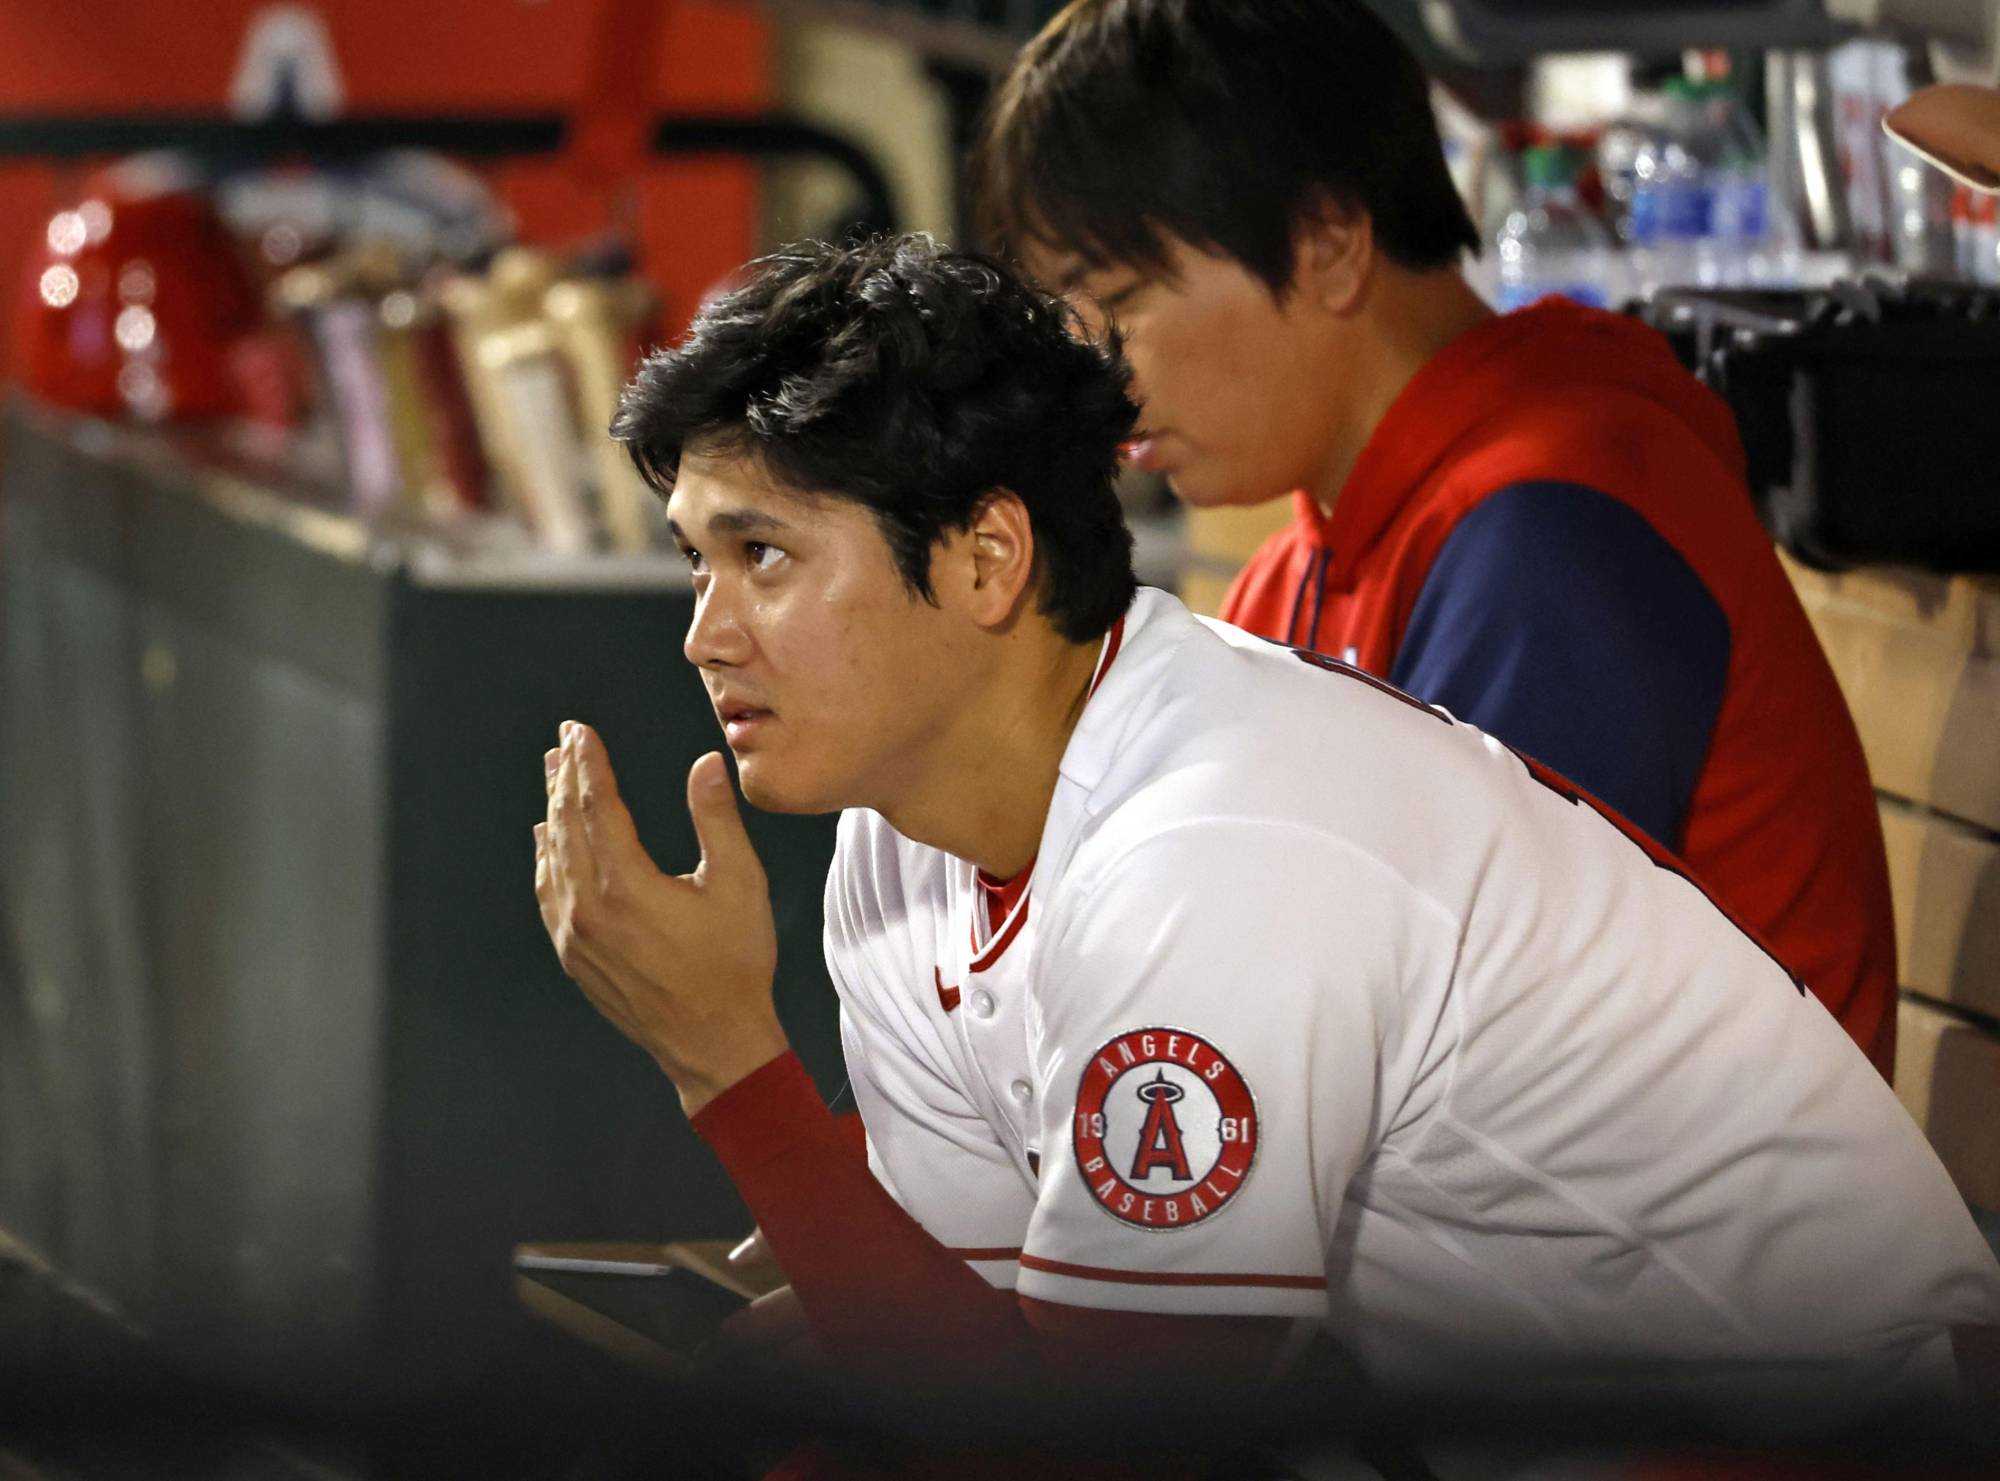 Angels star Shohei Ohtani watches from the bench after pitching six innings against the Mariners in Anaheim, California, on Monday. | KYODO